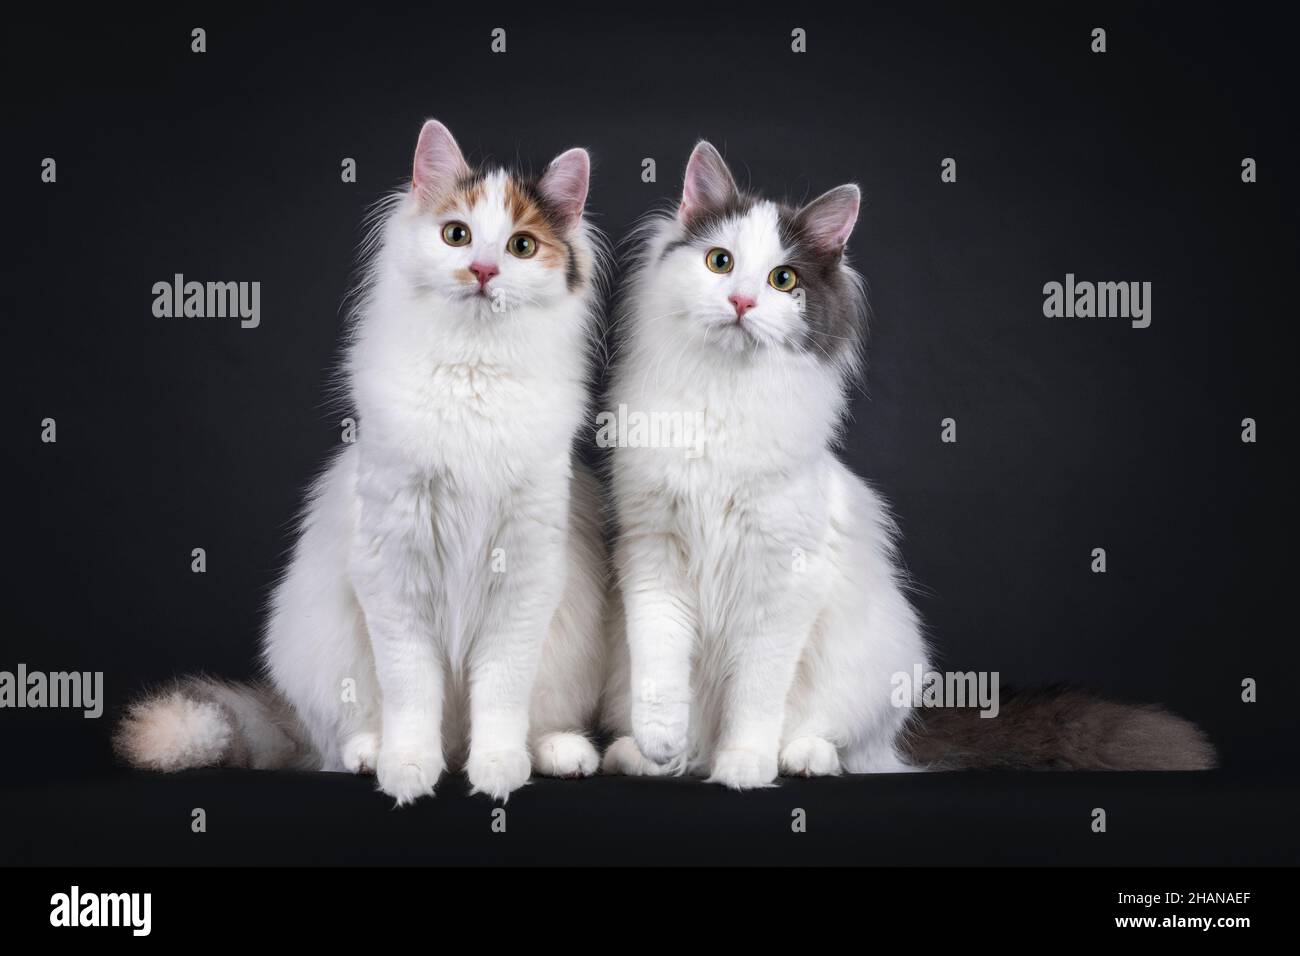 2 Adorable young Turkish Van cats, sitting beside each other facing front. Looking both straight to camera. Isolated on a black background. Stock Photo